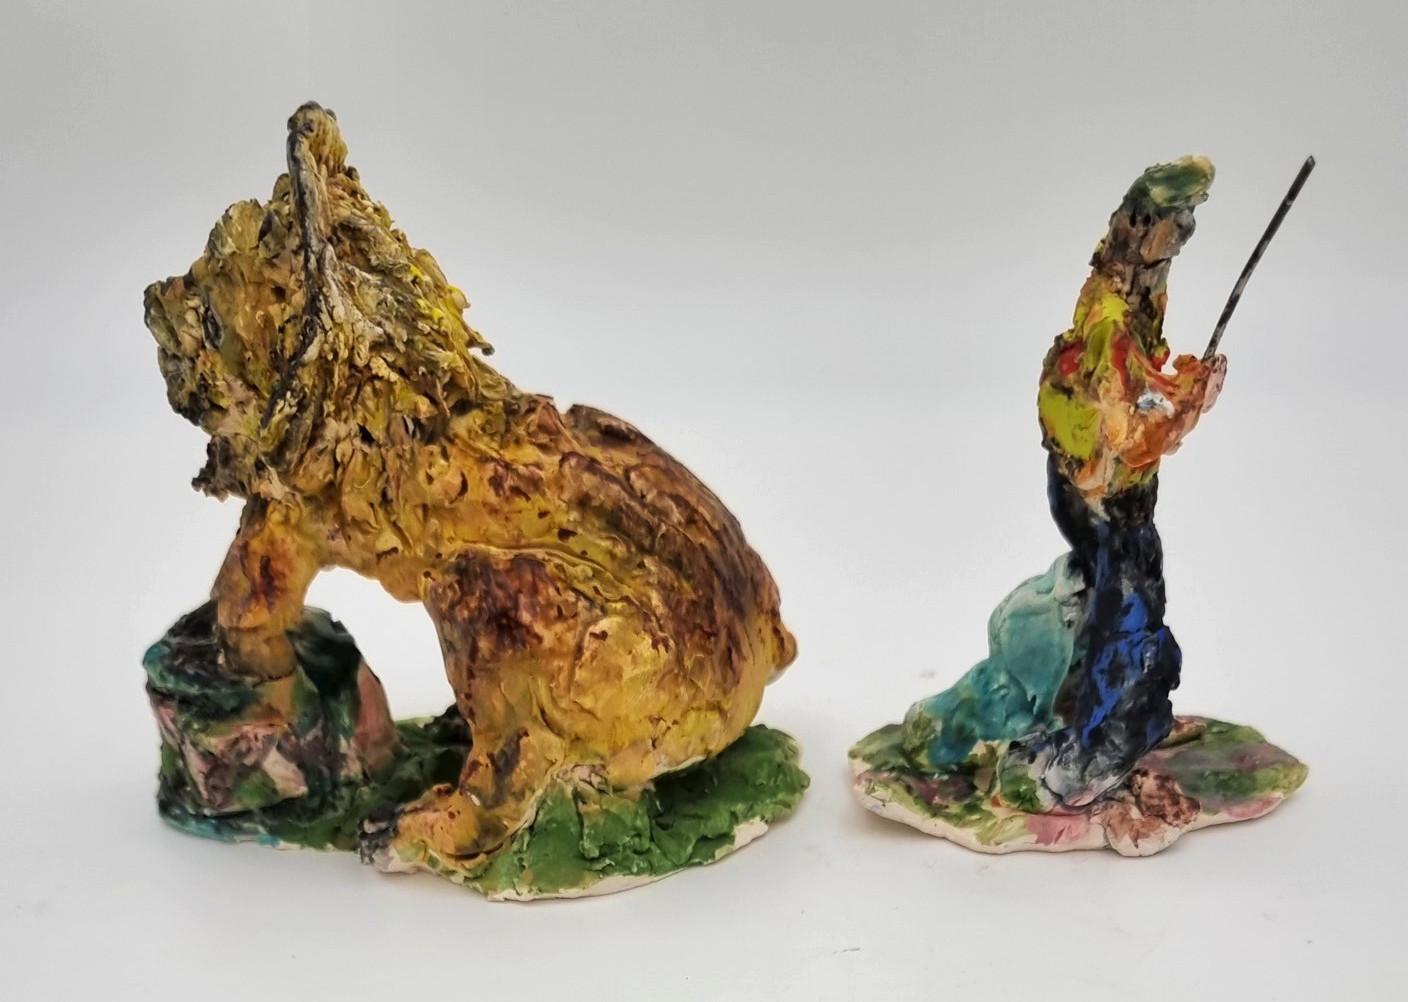 Ann Rothman
Lion and Lion Tamer (Circus, Whimsical, Viola Frey, Delicate, Playful, Fun, Cirque du Soleil, The Ringling Bros., Barnum & Bailey)
2021
Porcelain, Low Fire Glazes, Crayons, Watercolors
Fired Cone 06, 04
Lion: 5.5 x 3.5 x 6 inches
Lion